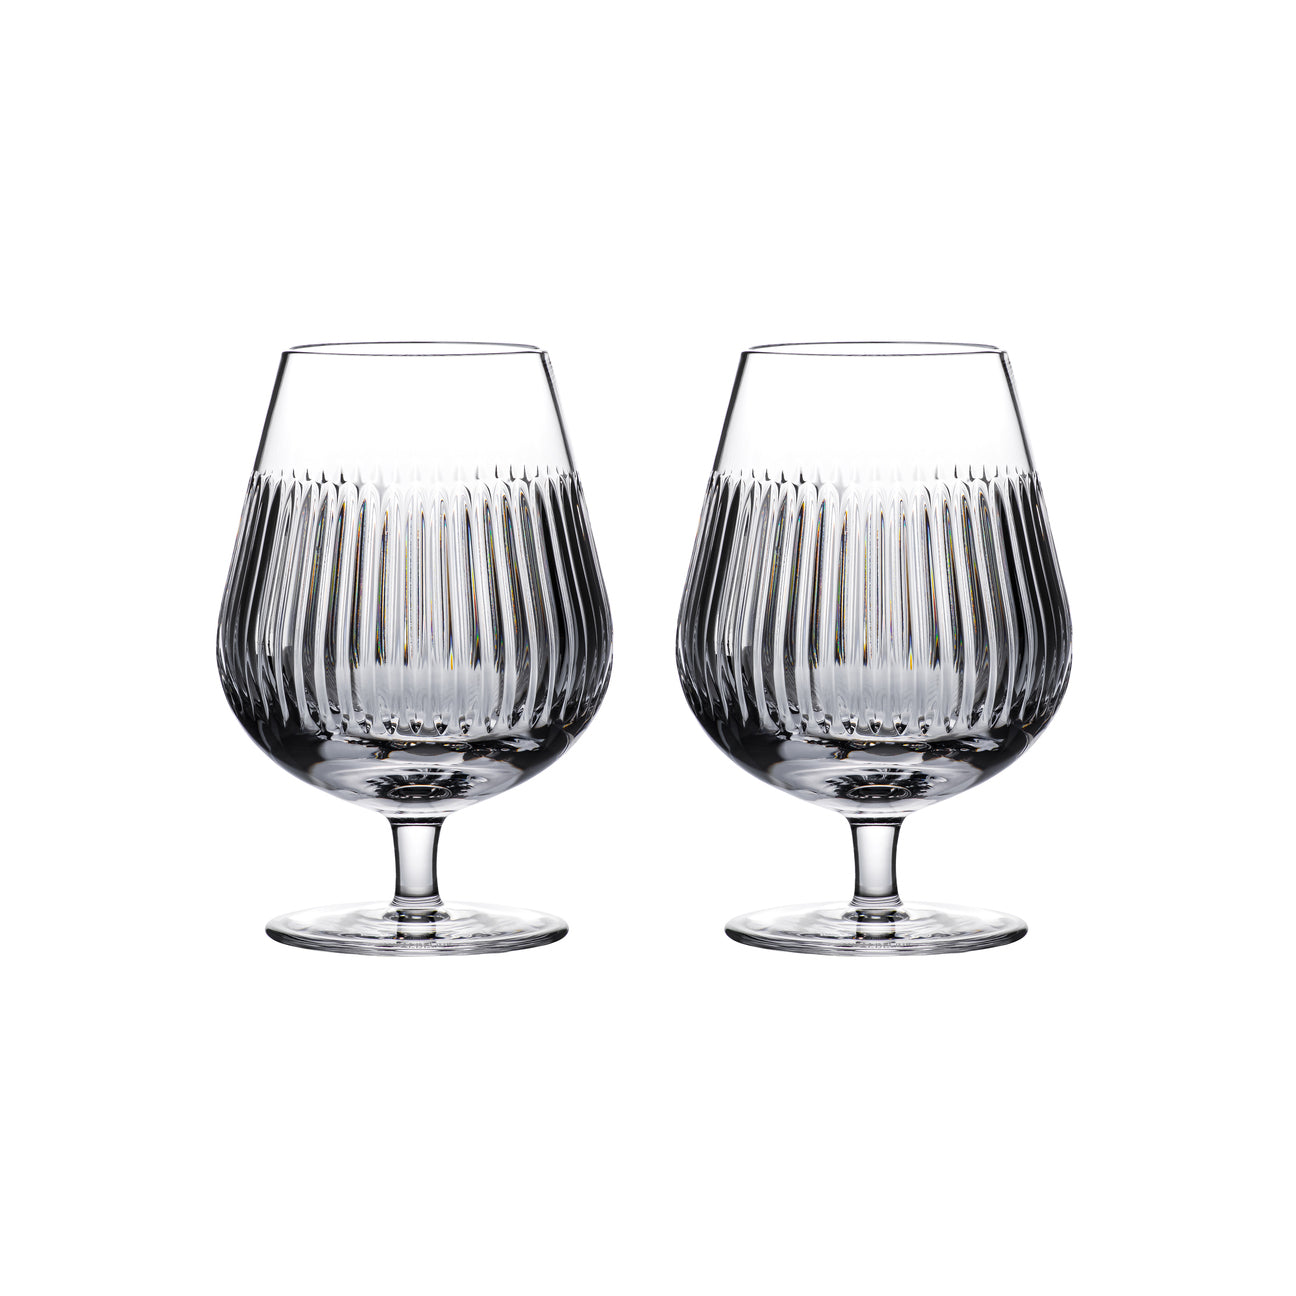 Waterford Crystal Connoisseur Aras Brandy Balloon Glass Set of 2